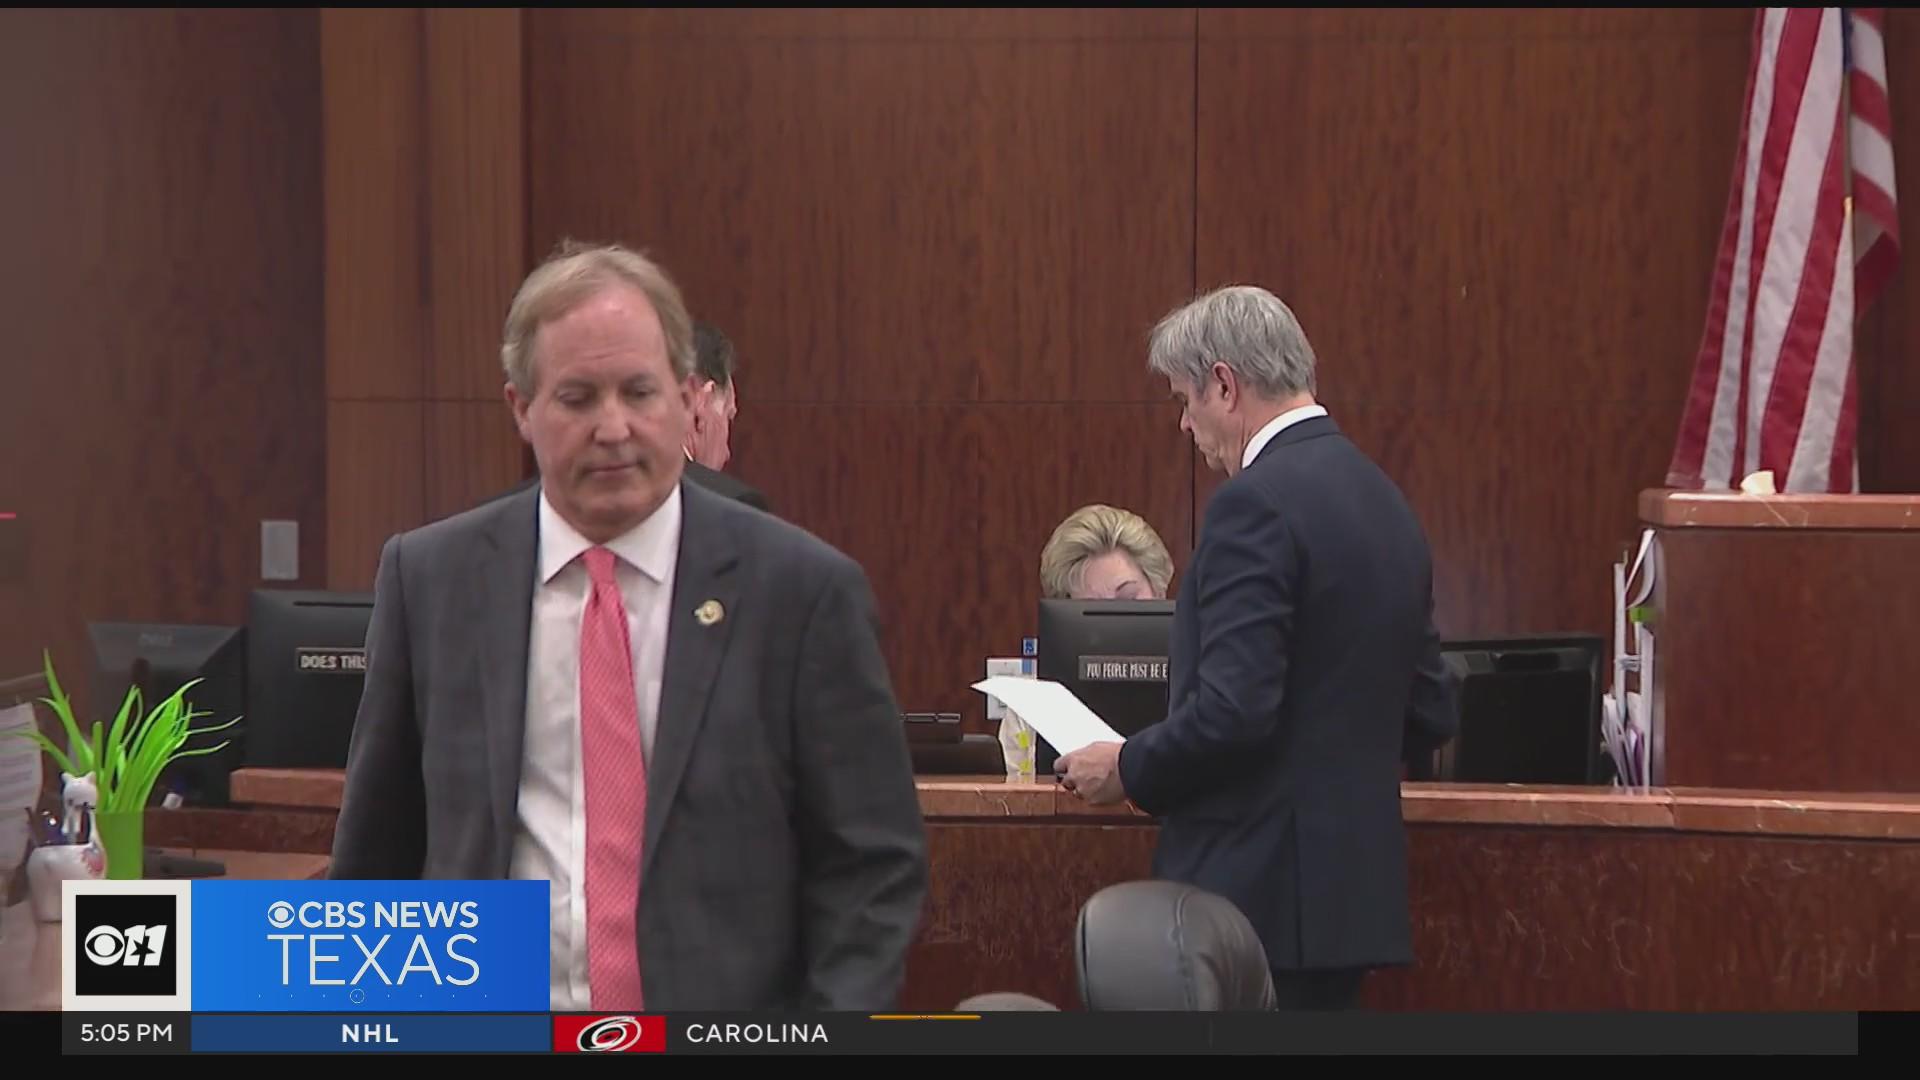 Paxton to pay restitution, do community service, take ethics classes to avoid trial and have charges dropped